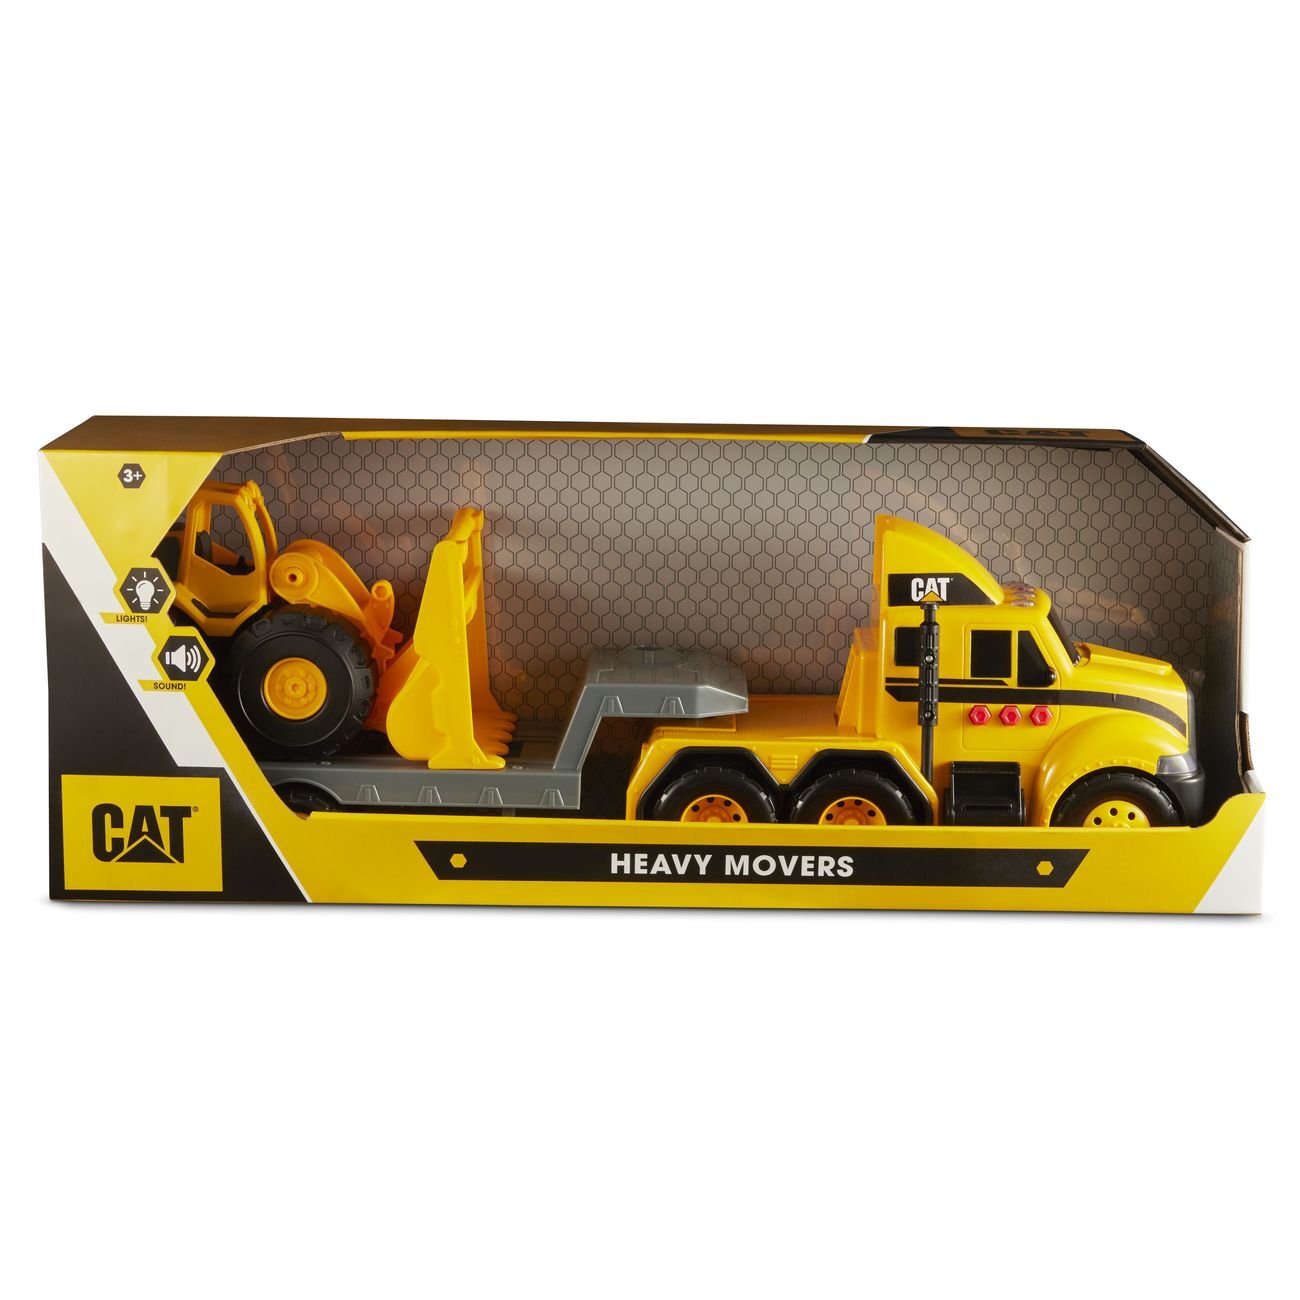 Cat Trailer and Wheel Loader - Heavy Movers